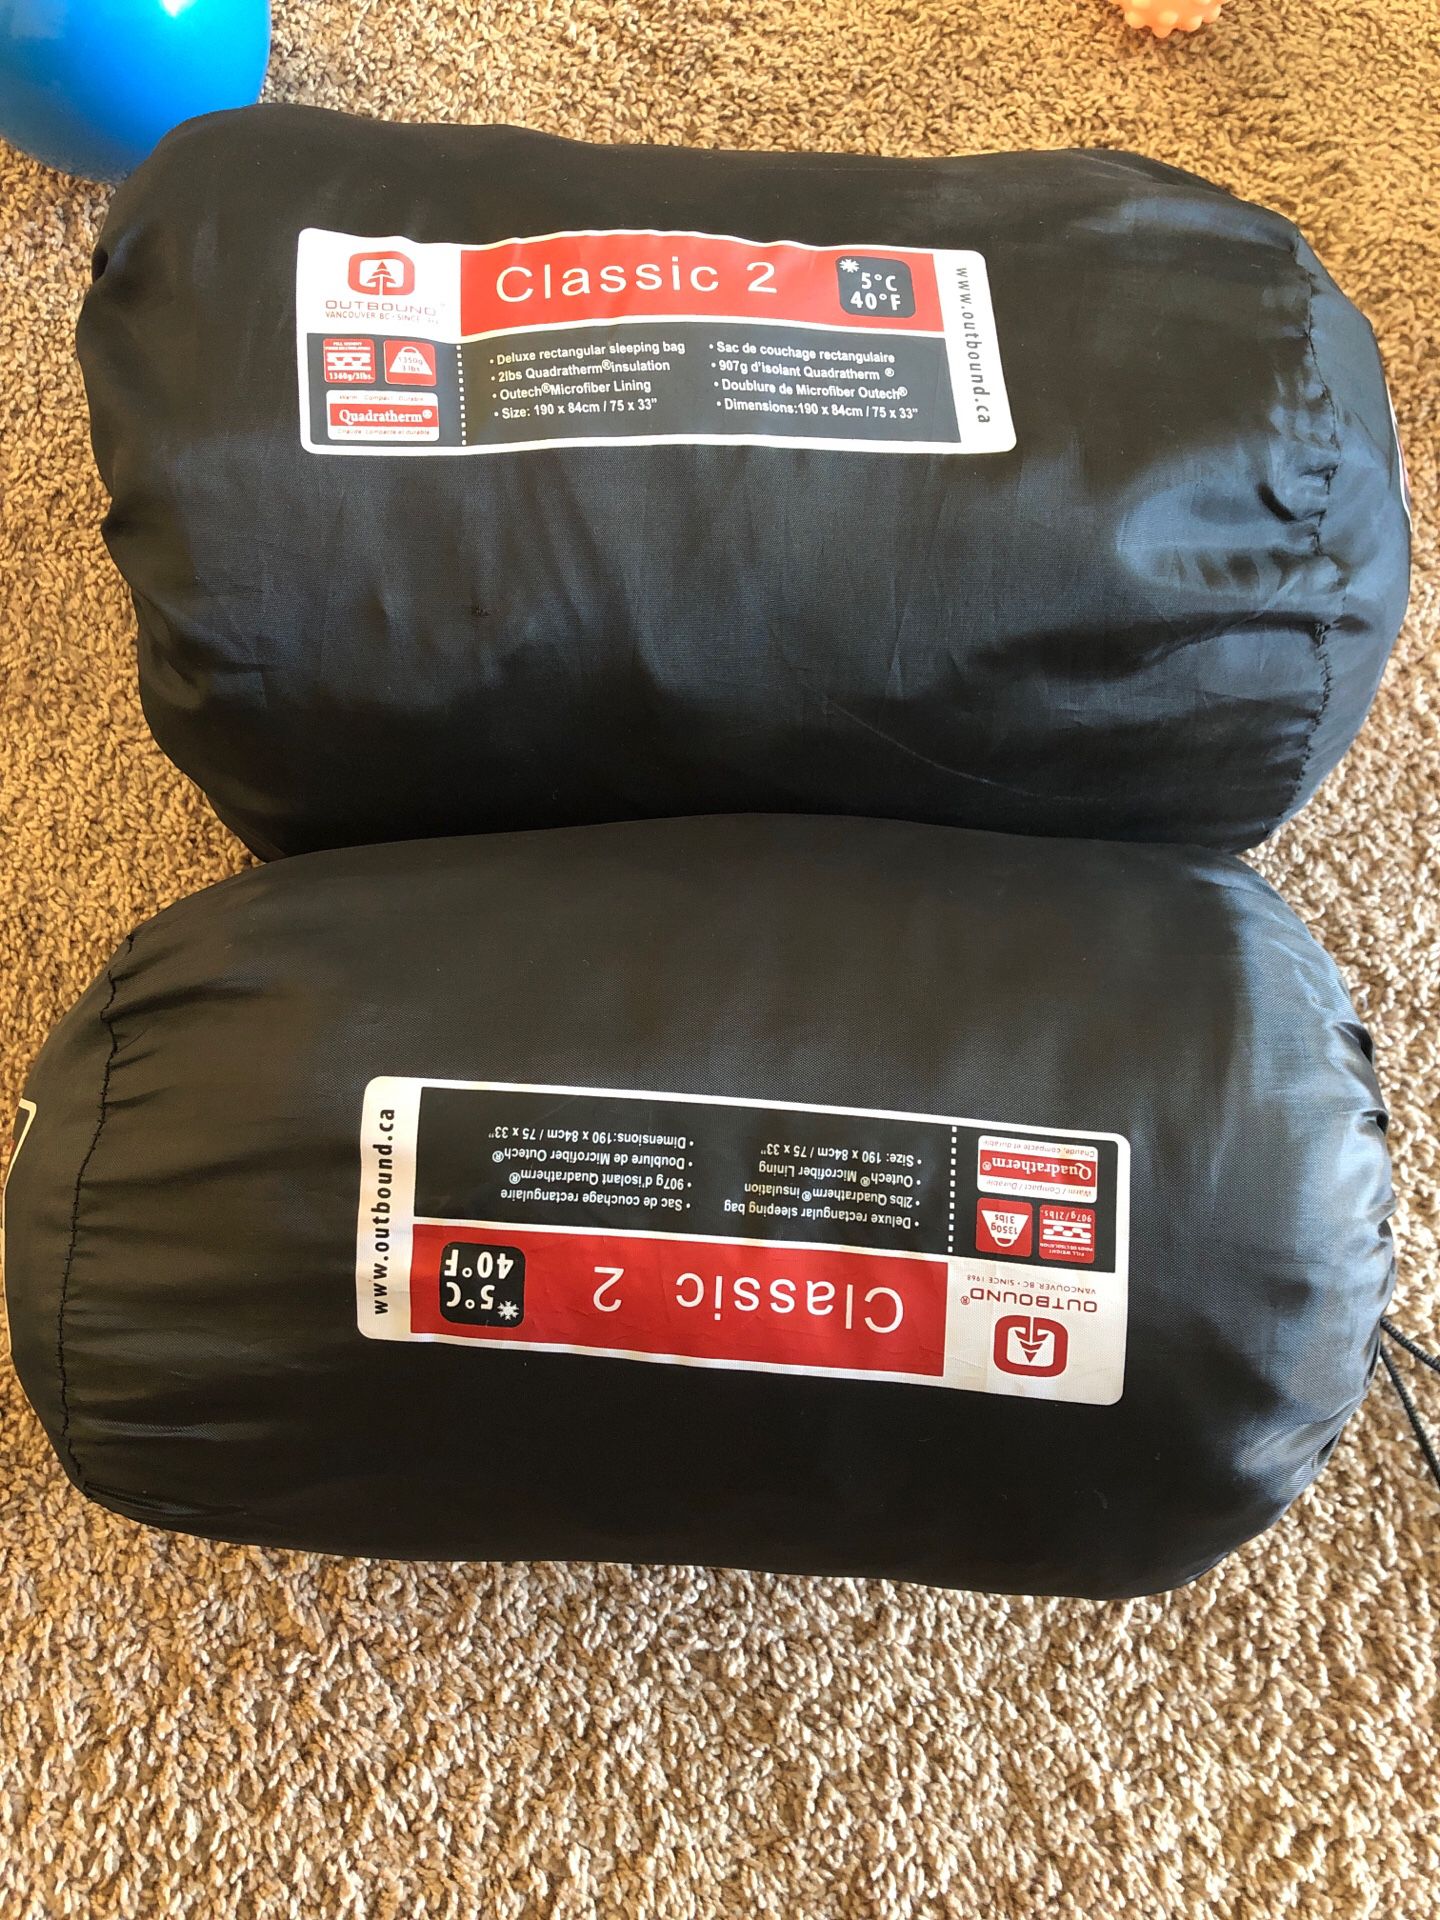 Camping gear. Sleeping bags OBO *moving sale*